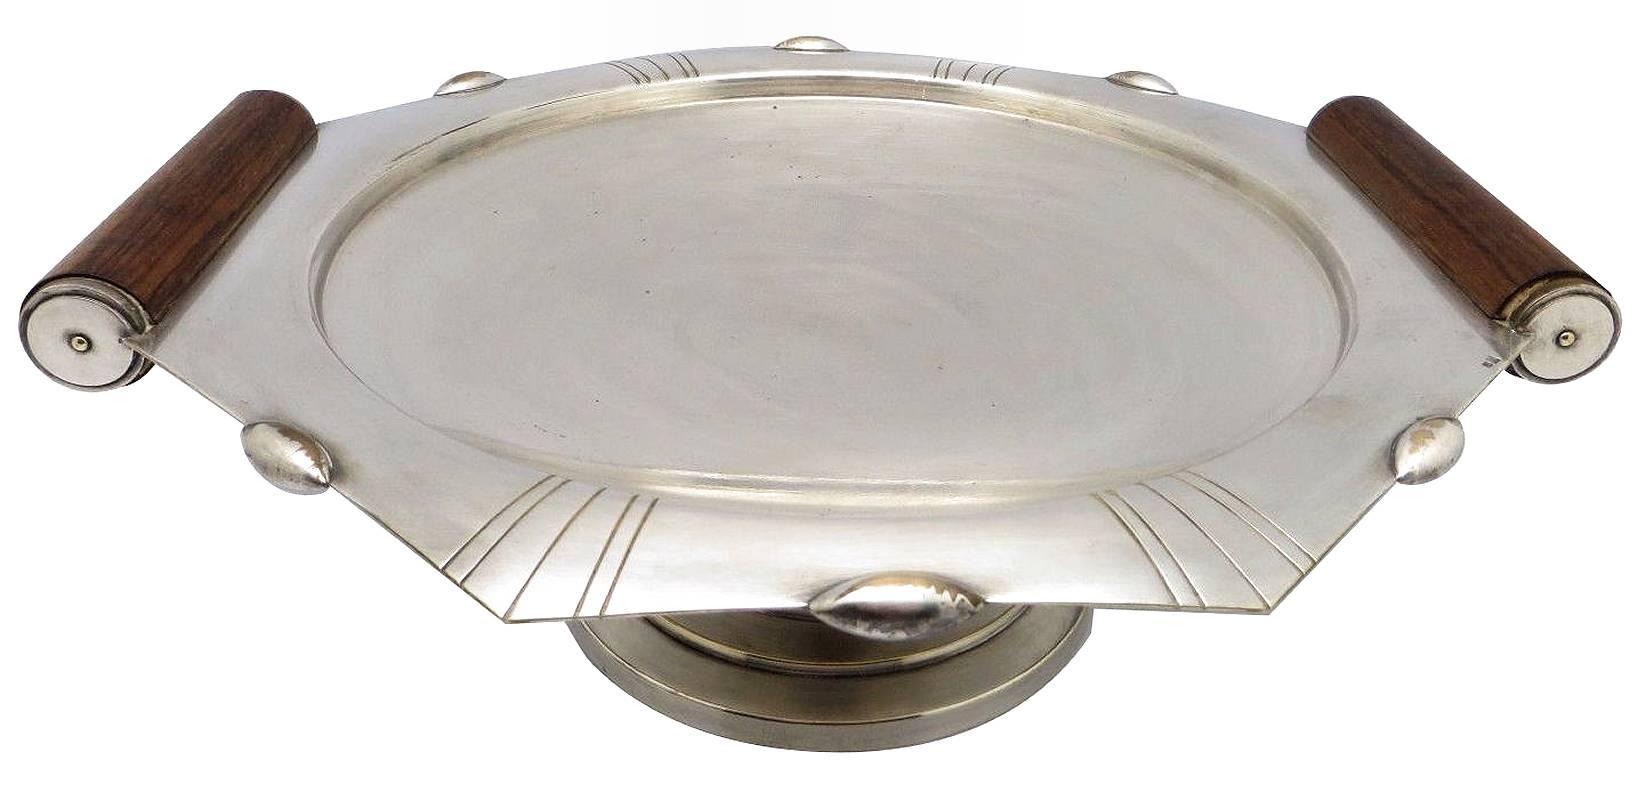 High styled, 1930s Modernist coupe or fruit bowl originating from France and stamped RM for Roux - Marquiand. The metal is silver plated and the handles with stylized column are Rosewood. A stylish statement to center piece any room or